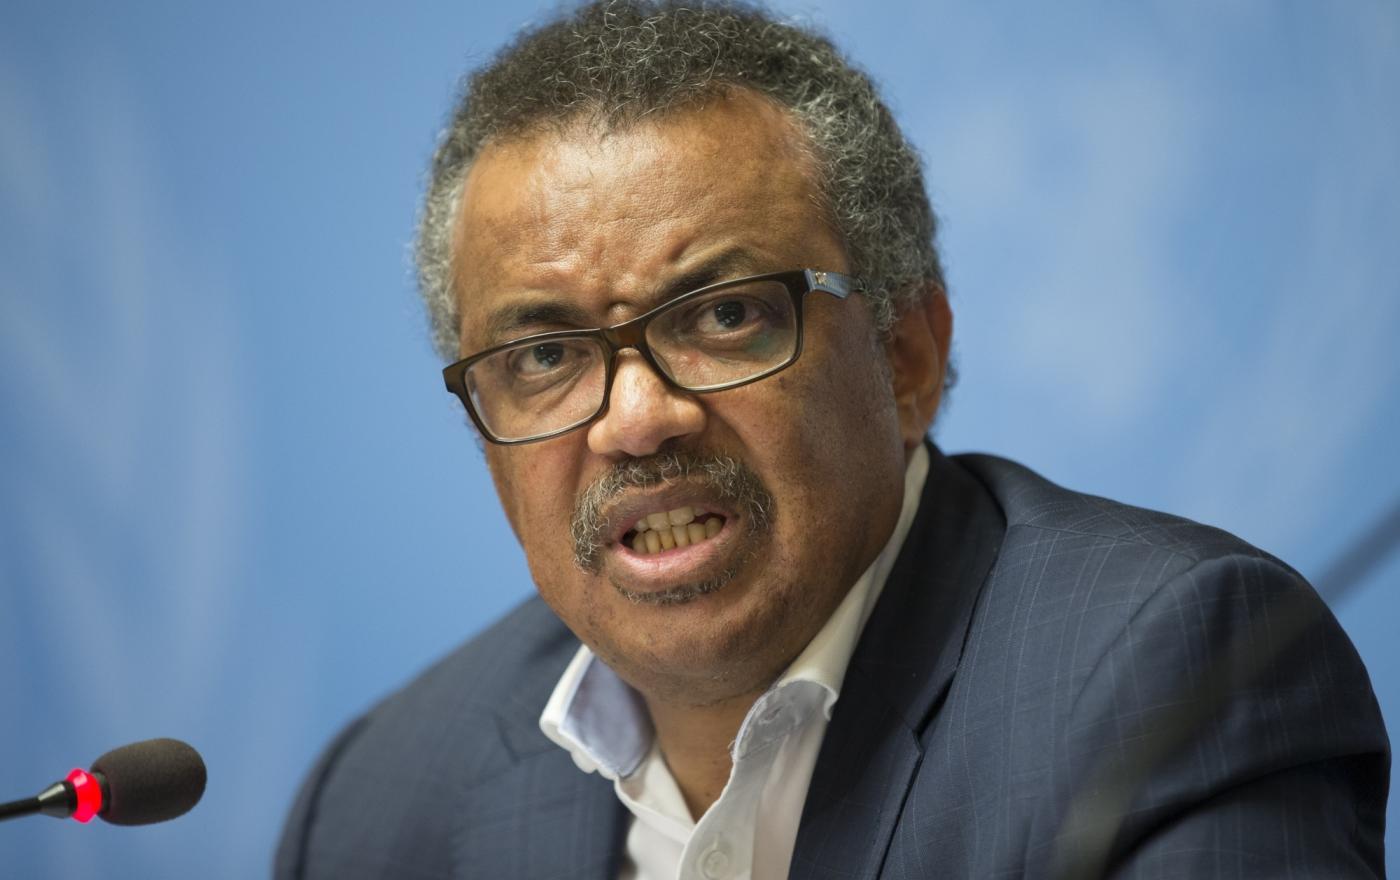 GENEVA, Aug. 14, 2018 (Xinhua) -- Director-General of the World Health Organization Tedros Adhanom Ghebreyesus attends a press conference in Geneva, Switzerland, Aug. 14, 2018. Tedros Adhanom Ghebreyesus said Tuesday that he's even more worried about the latest Ebola outbreak in the Democratic Republic of Congo (DR Congo) after his recent visit to the country, mainly because of the intense security challenge in the virus-hit areas. (Xinhua/Xu Jinquan/IANS) by .